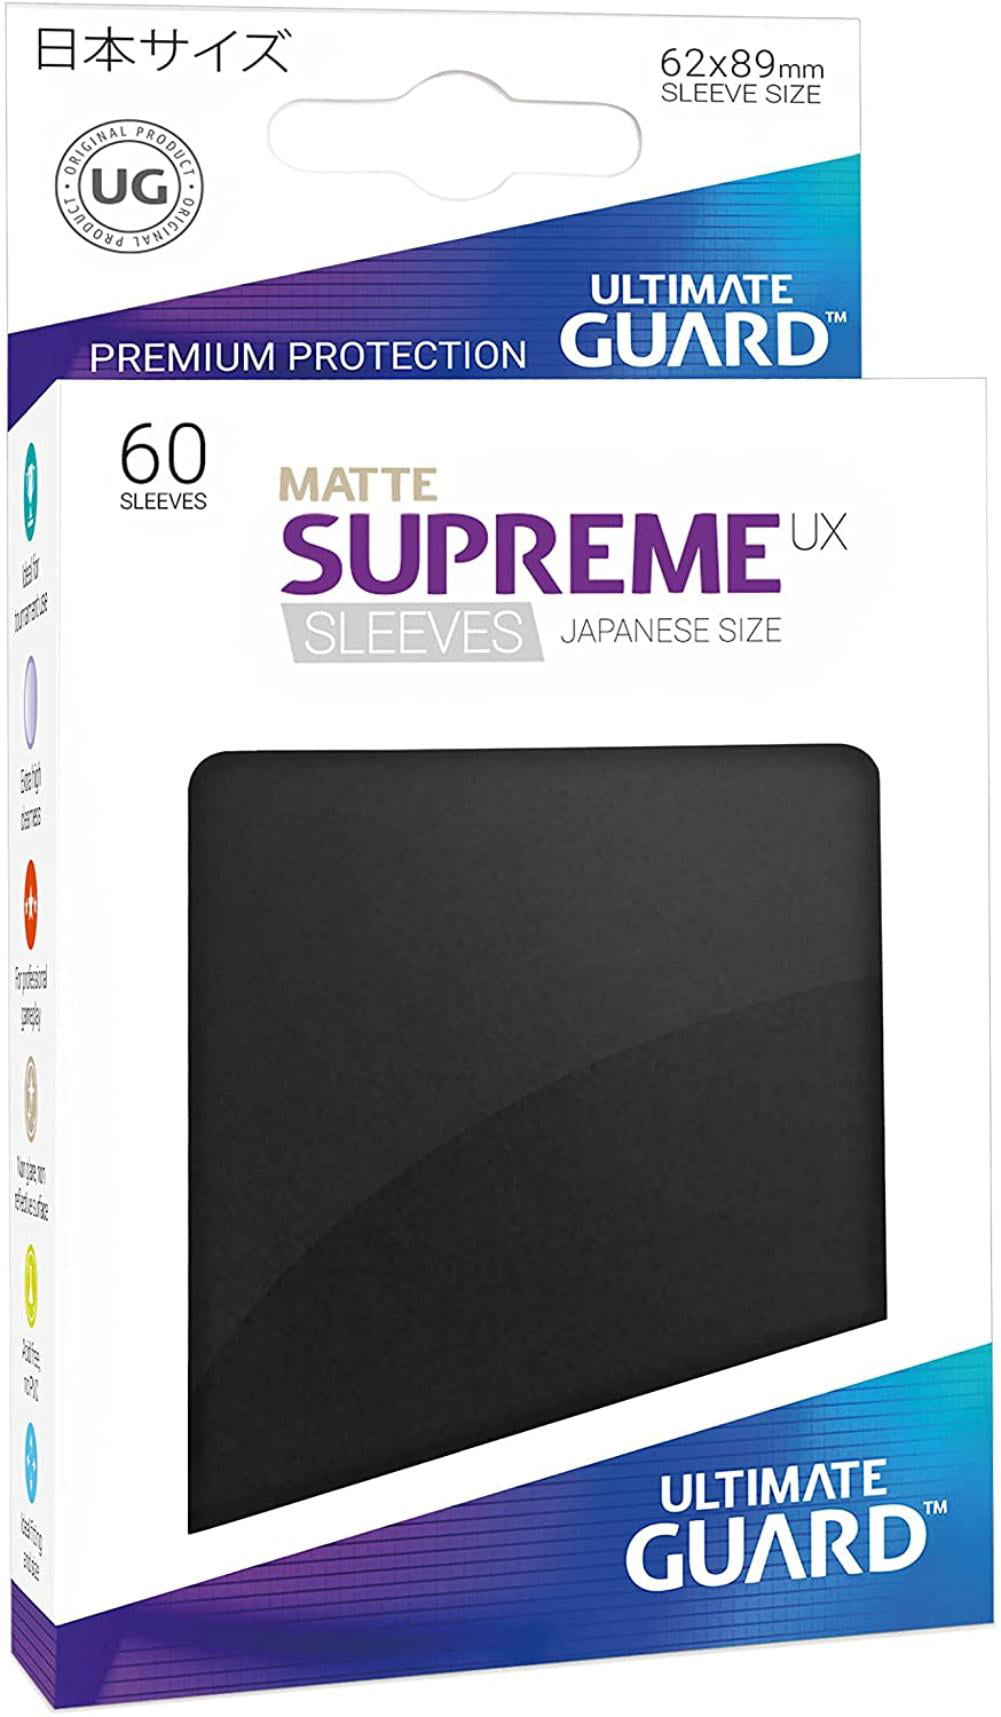 Ultimate Guard SUPREME UX High Quality Card Sleeves BLACK 